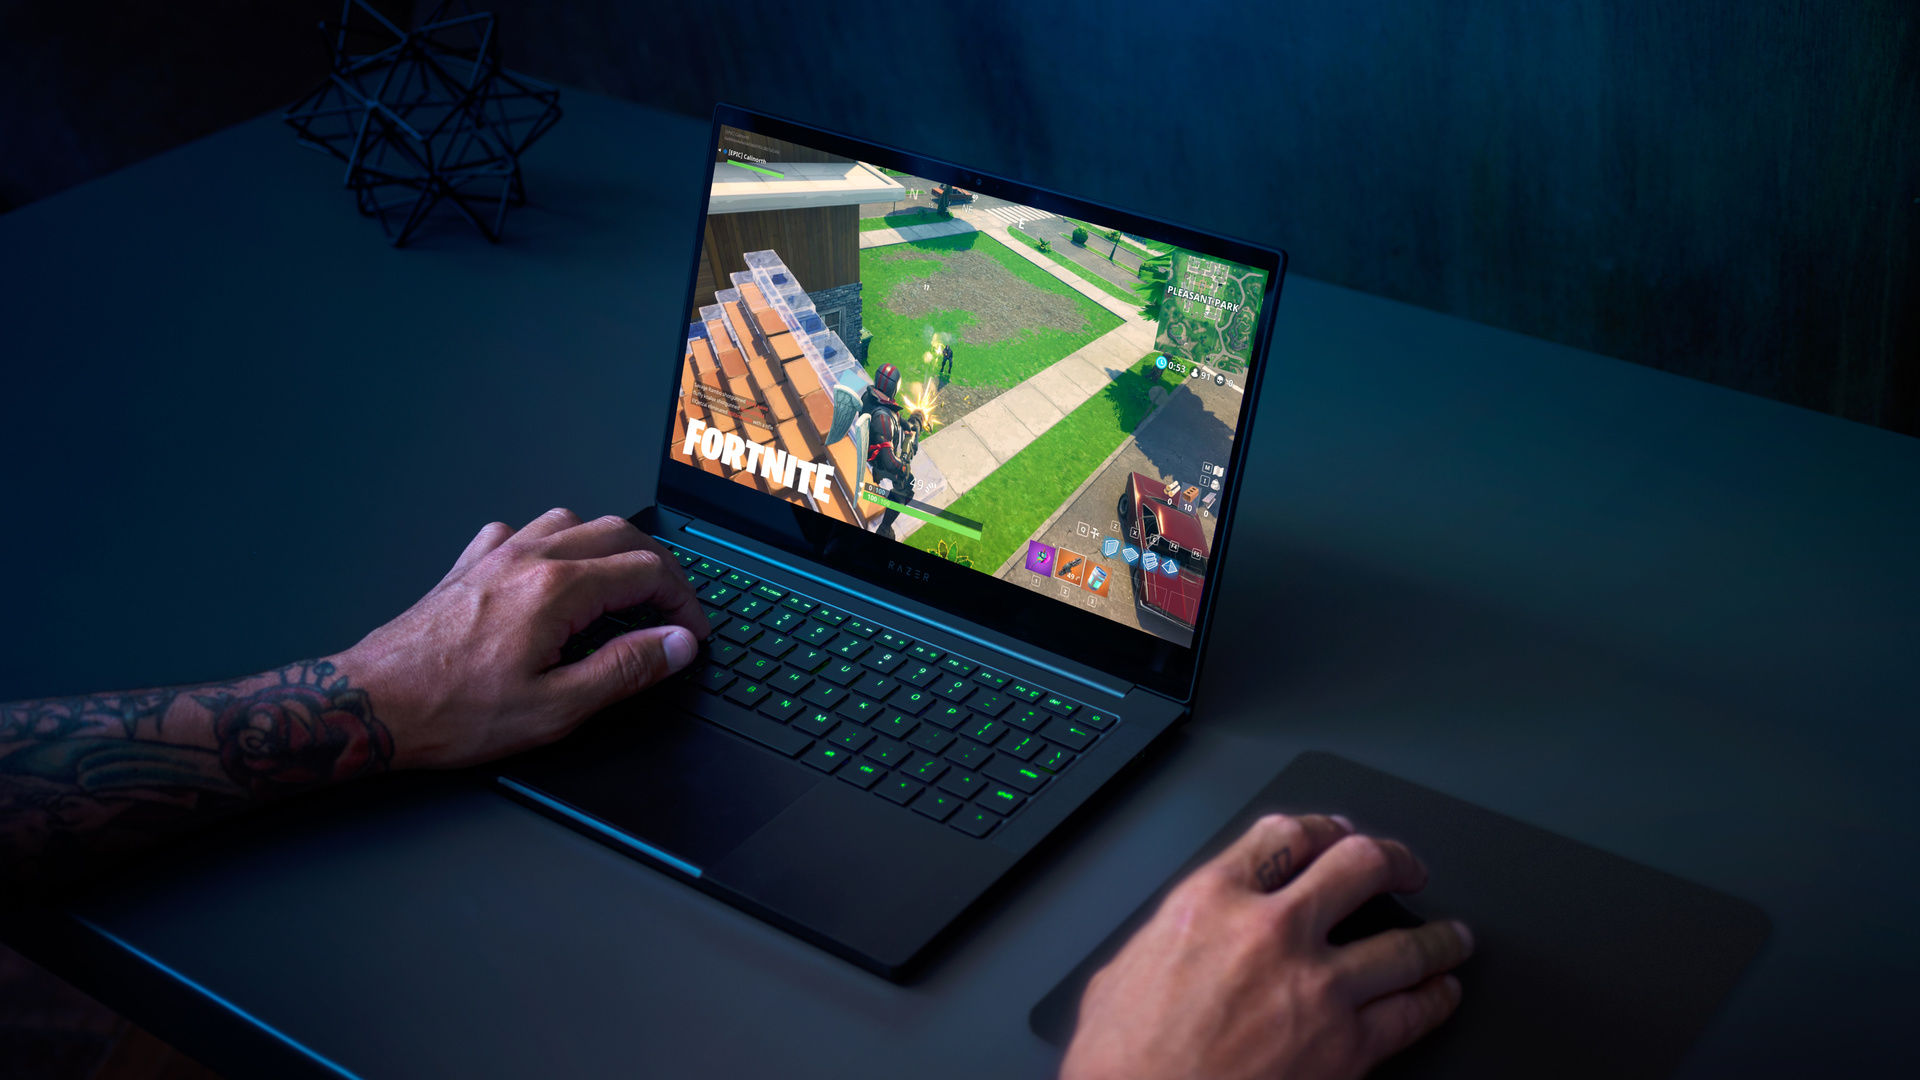 Playing Fortnite on the Razer Blade Stealth 13 (late 2019).